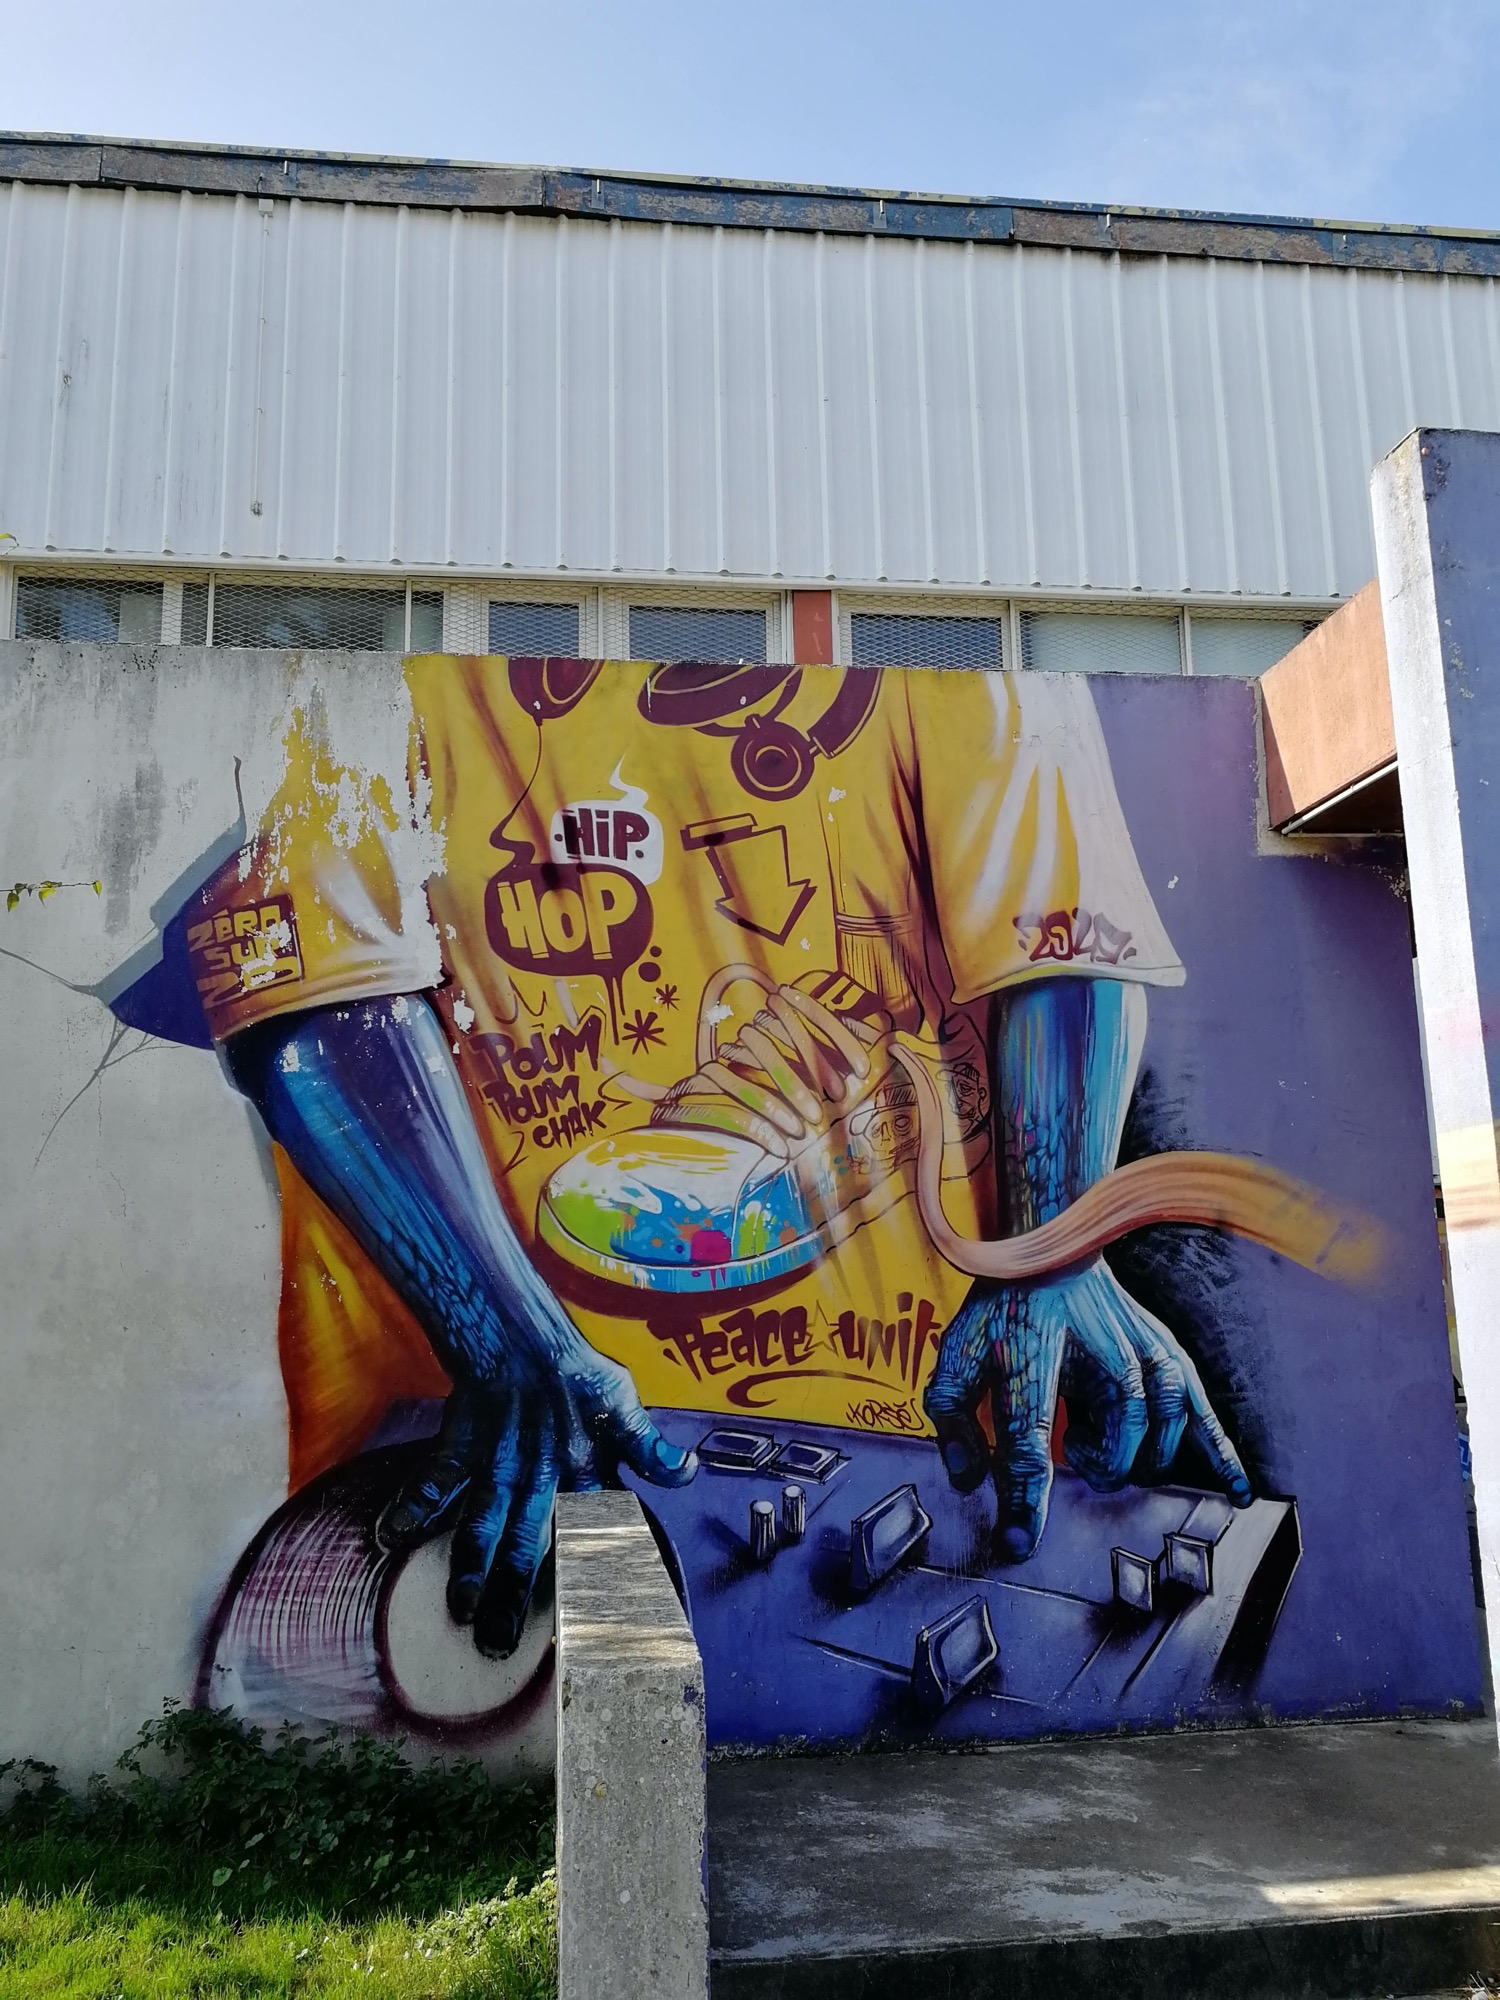 Graffiti 489  captured by Rabot in Nantes France